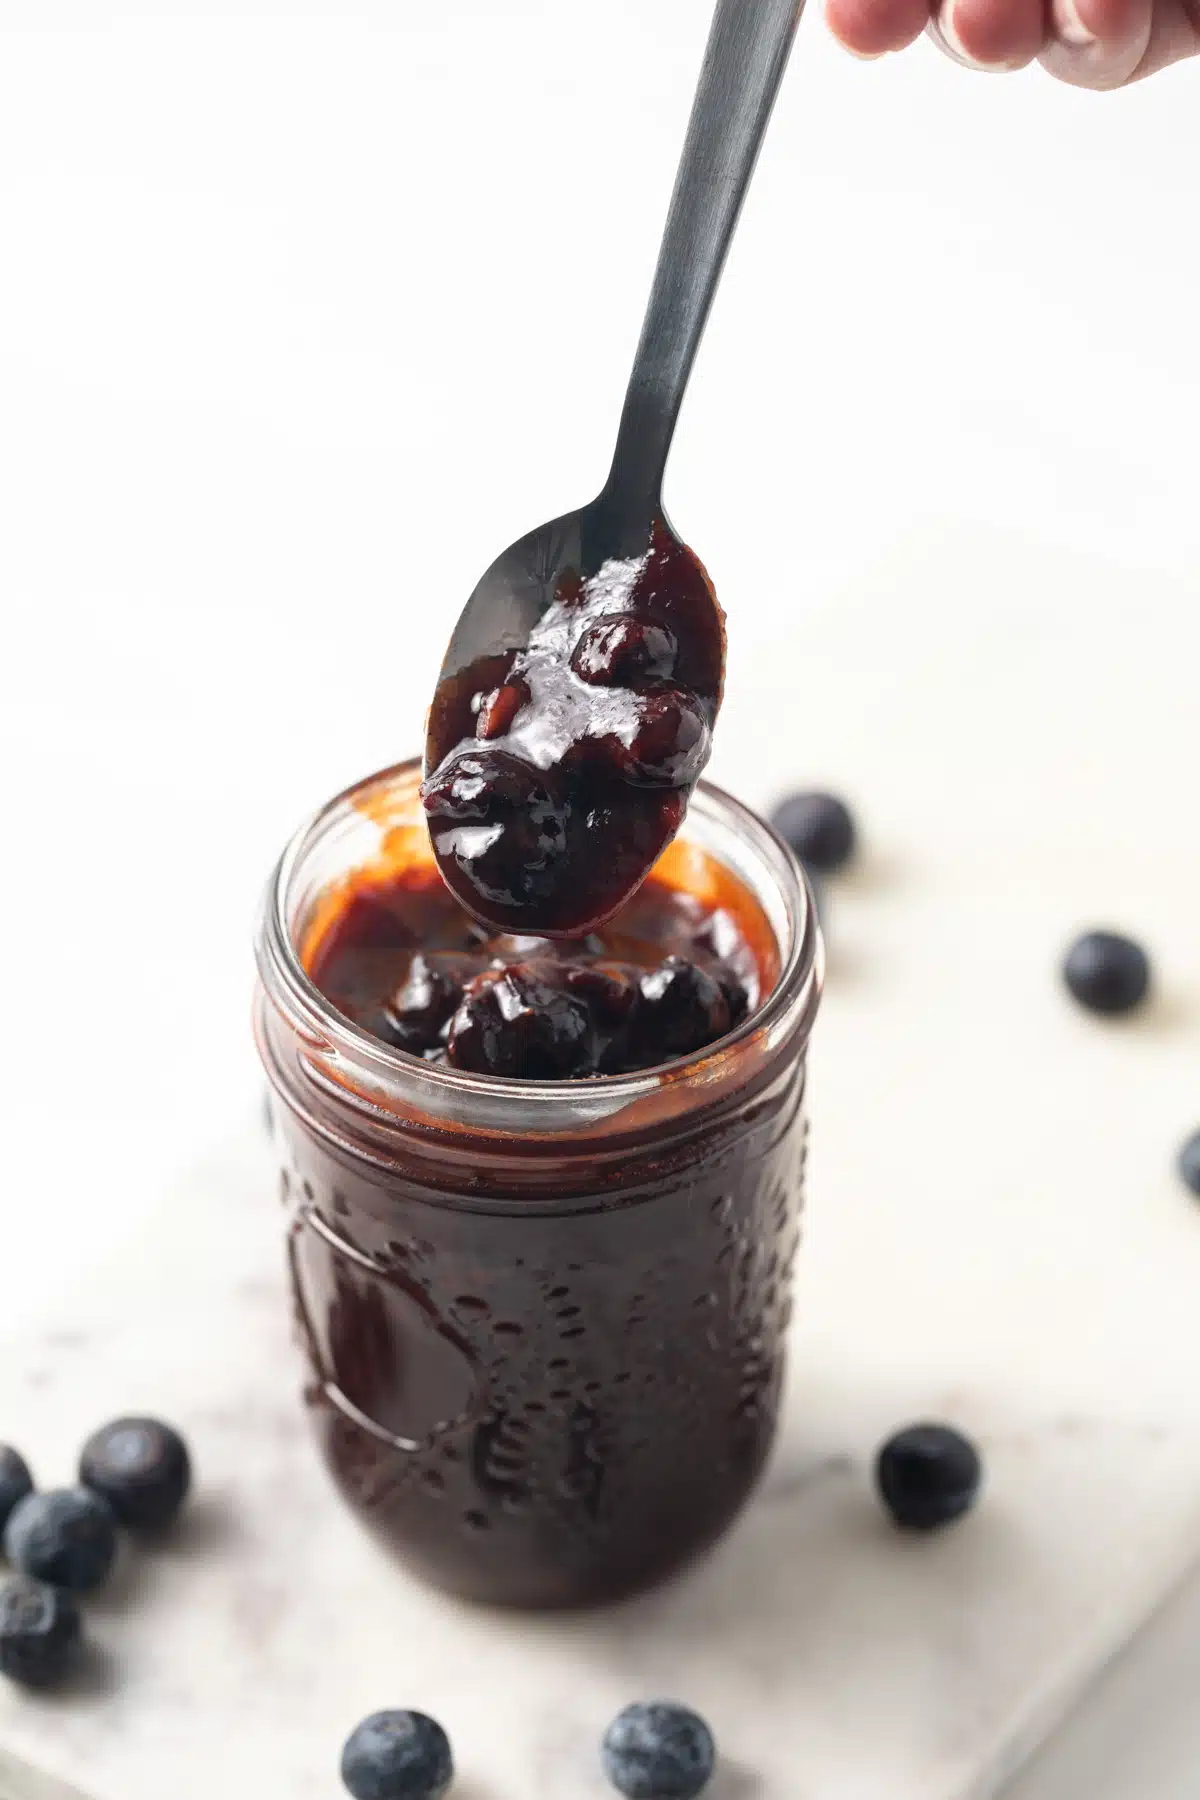 Blueberry BBQ sauce on a spoon.